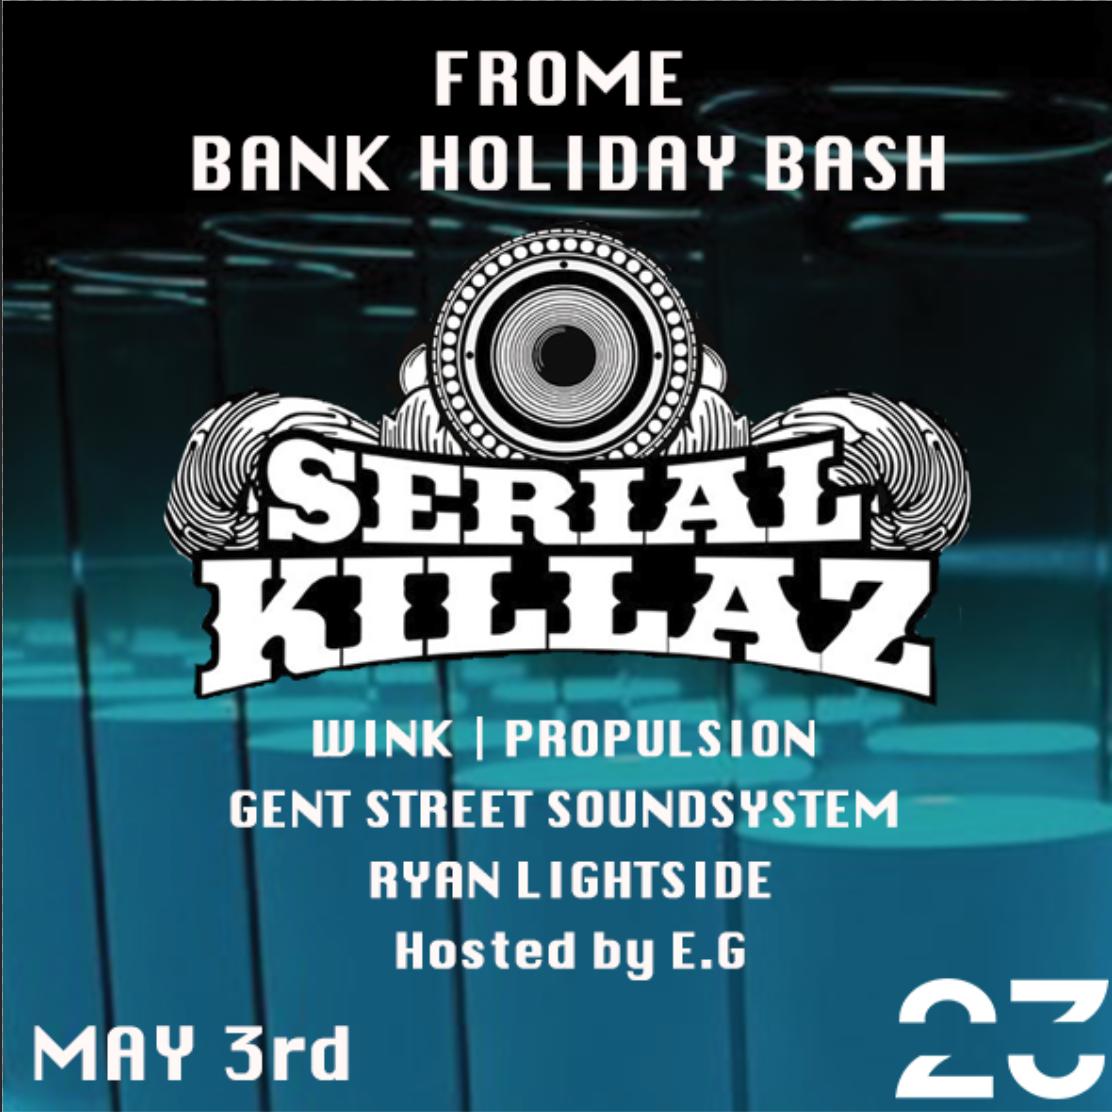 ❗️JUST ANNOUNCED❗️ Frome Bank Holiday Bash ft UK Jungle Drum and Bass LEGENDS...@Serial_Killaz 💥😮 Tkts on sale here: bit.ly/2OIWUzl